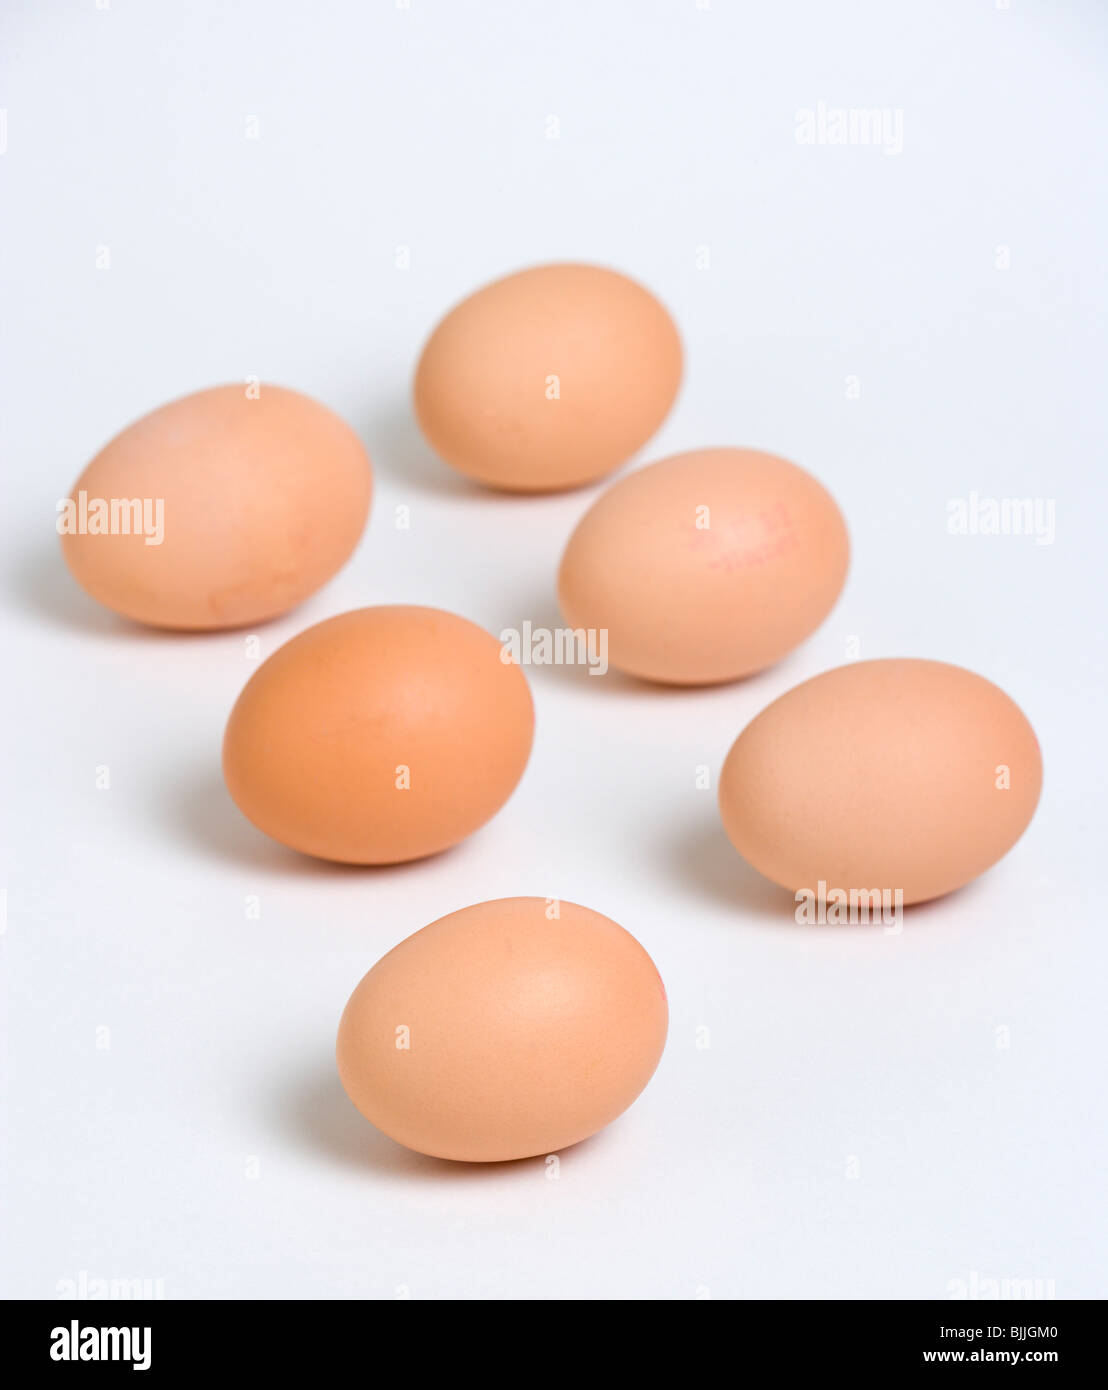 England, East Sussex, Brighton, Food, Uncooked, Eggs, Six free range eggs on a white background. Stock Photo